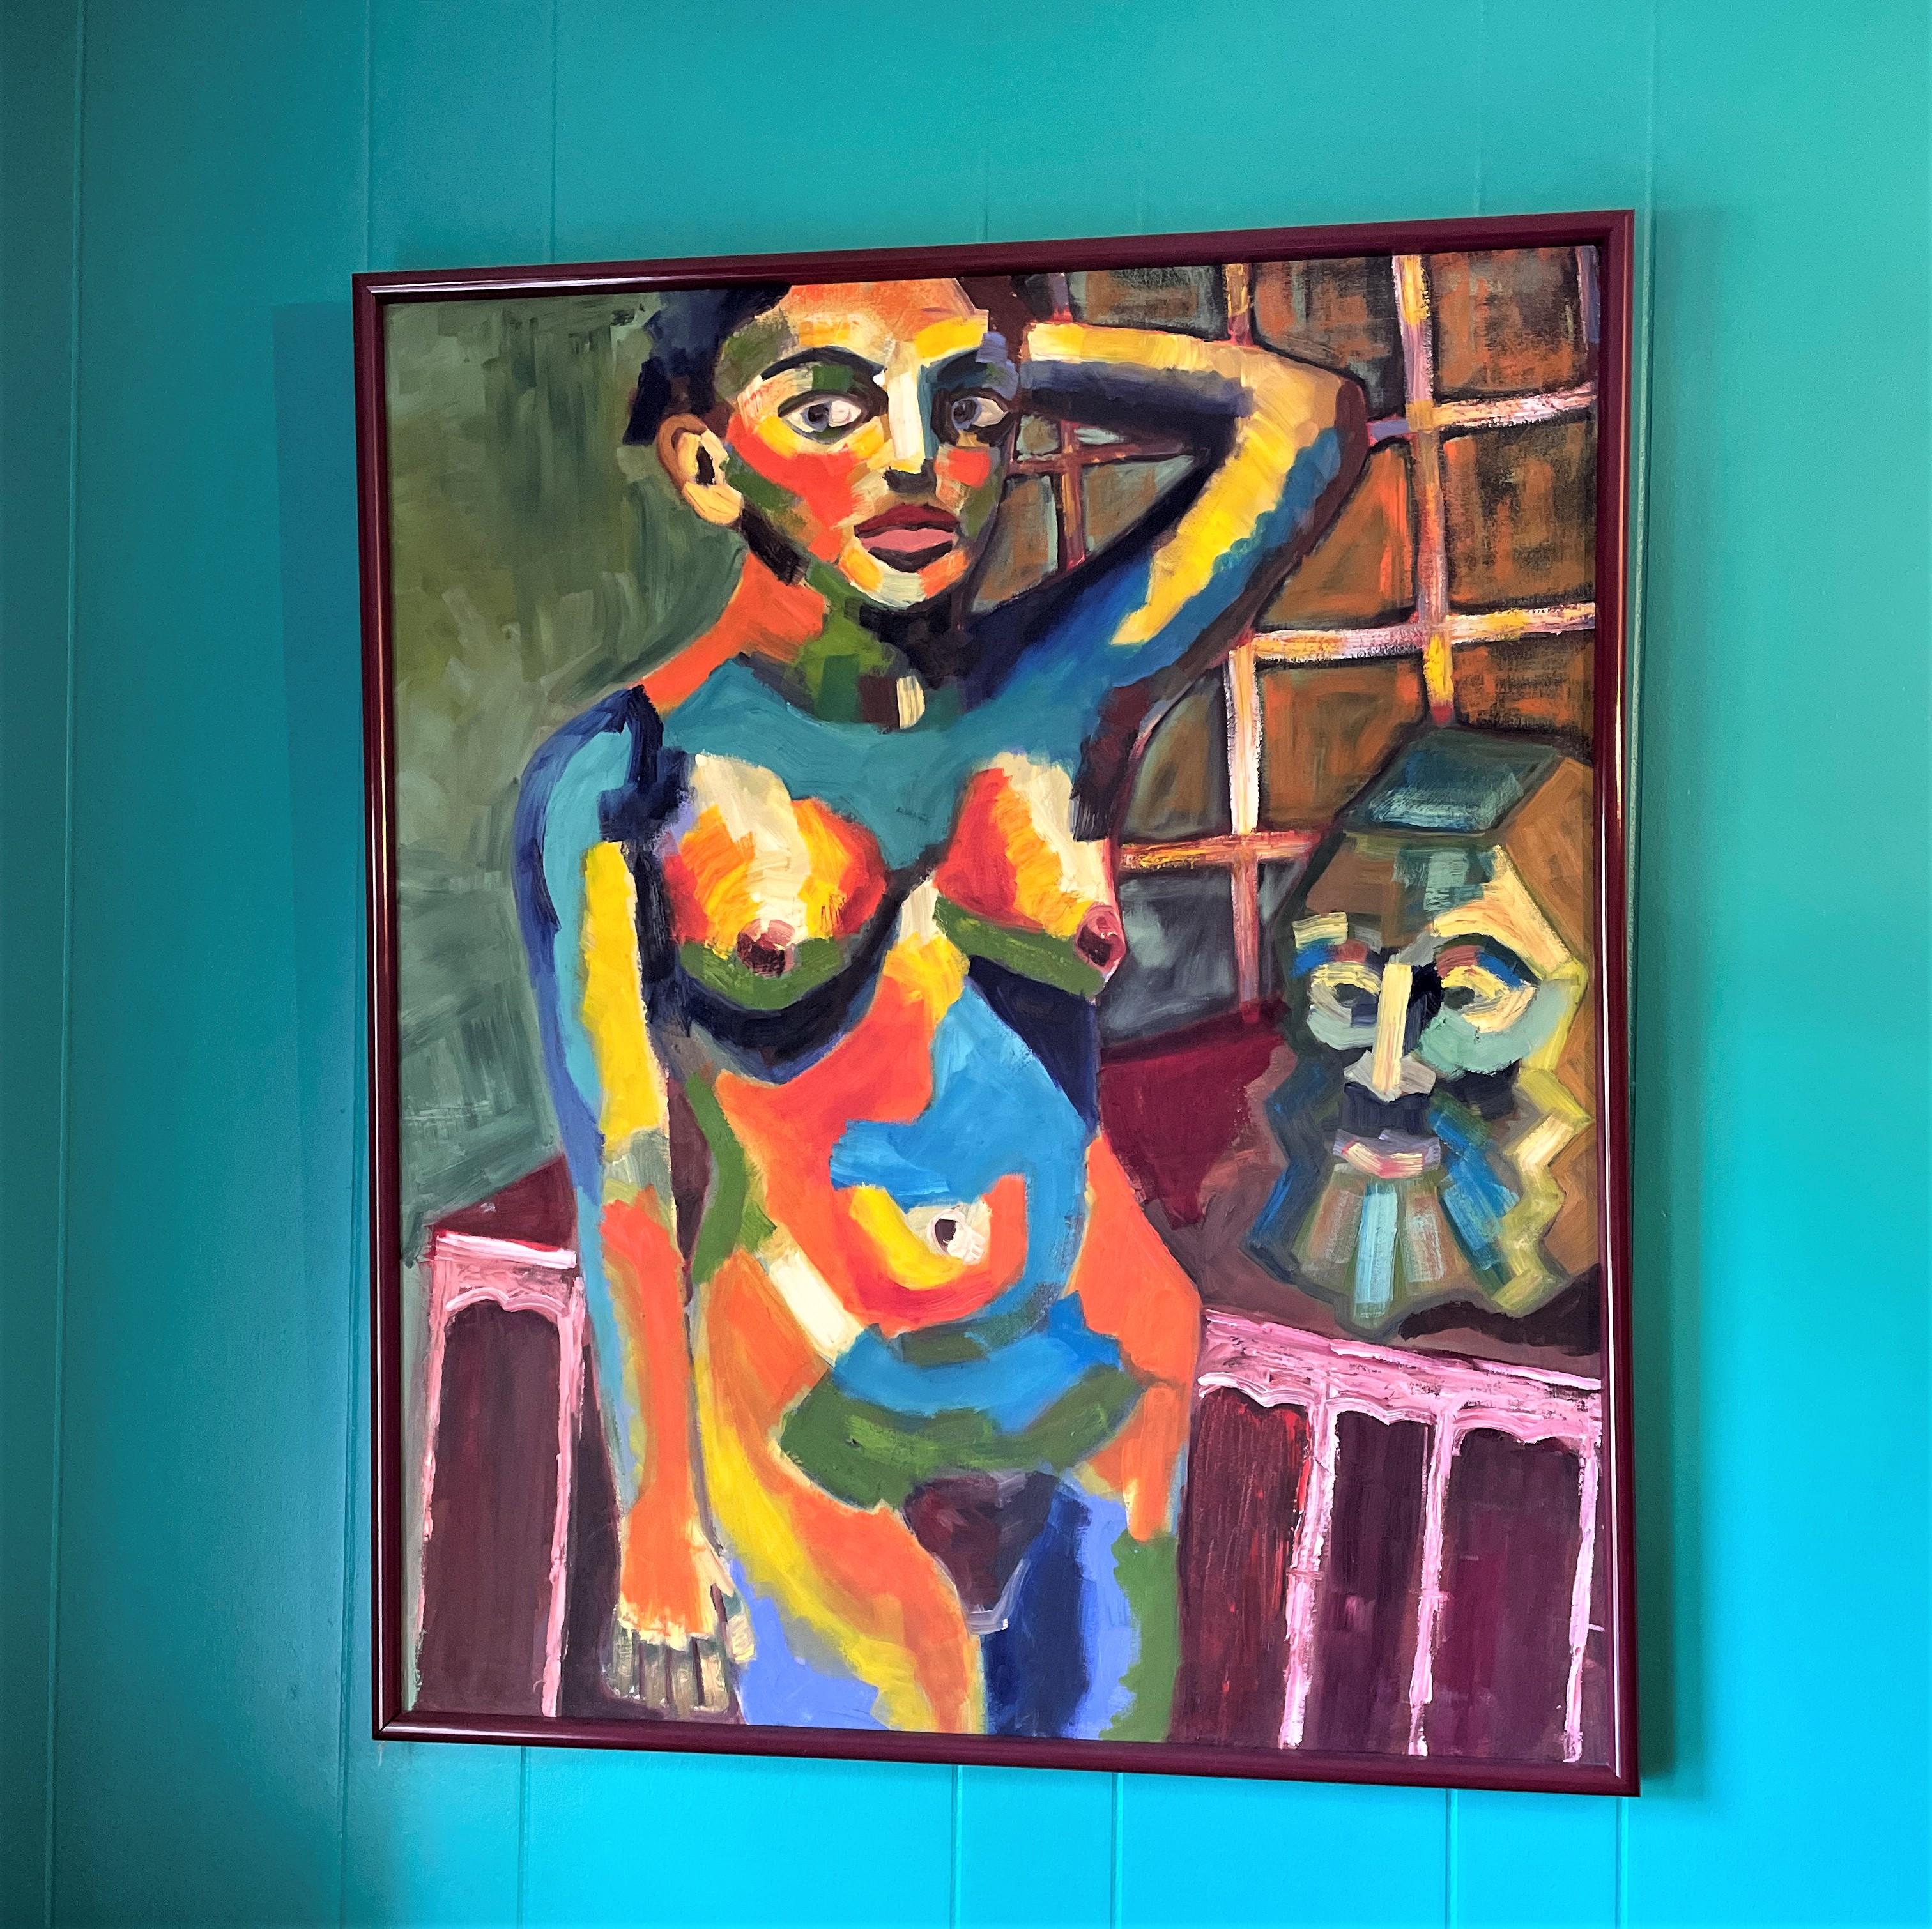 An arresting piece! Rendered with a Fauvist intensity. This oil painting has strong appeal and strong positive energy. It will bring on a smile. 

At 31